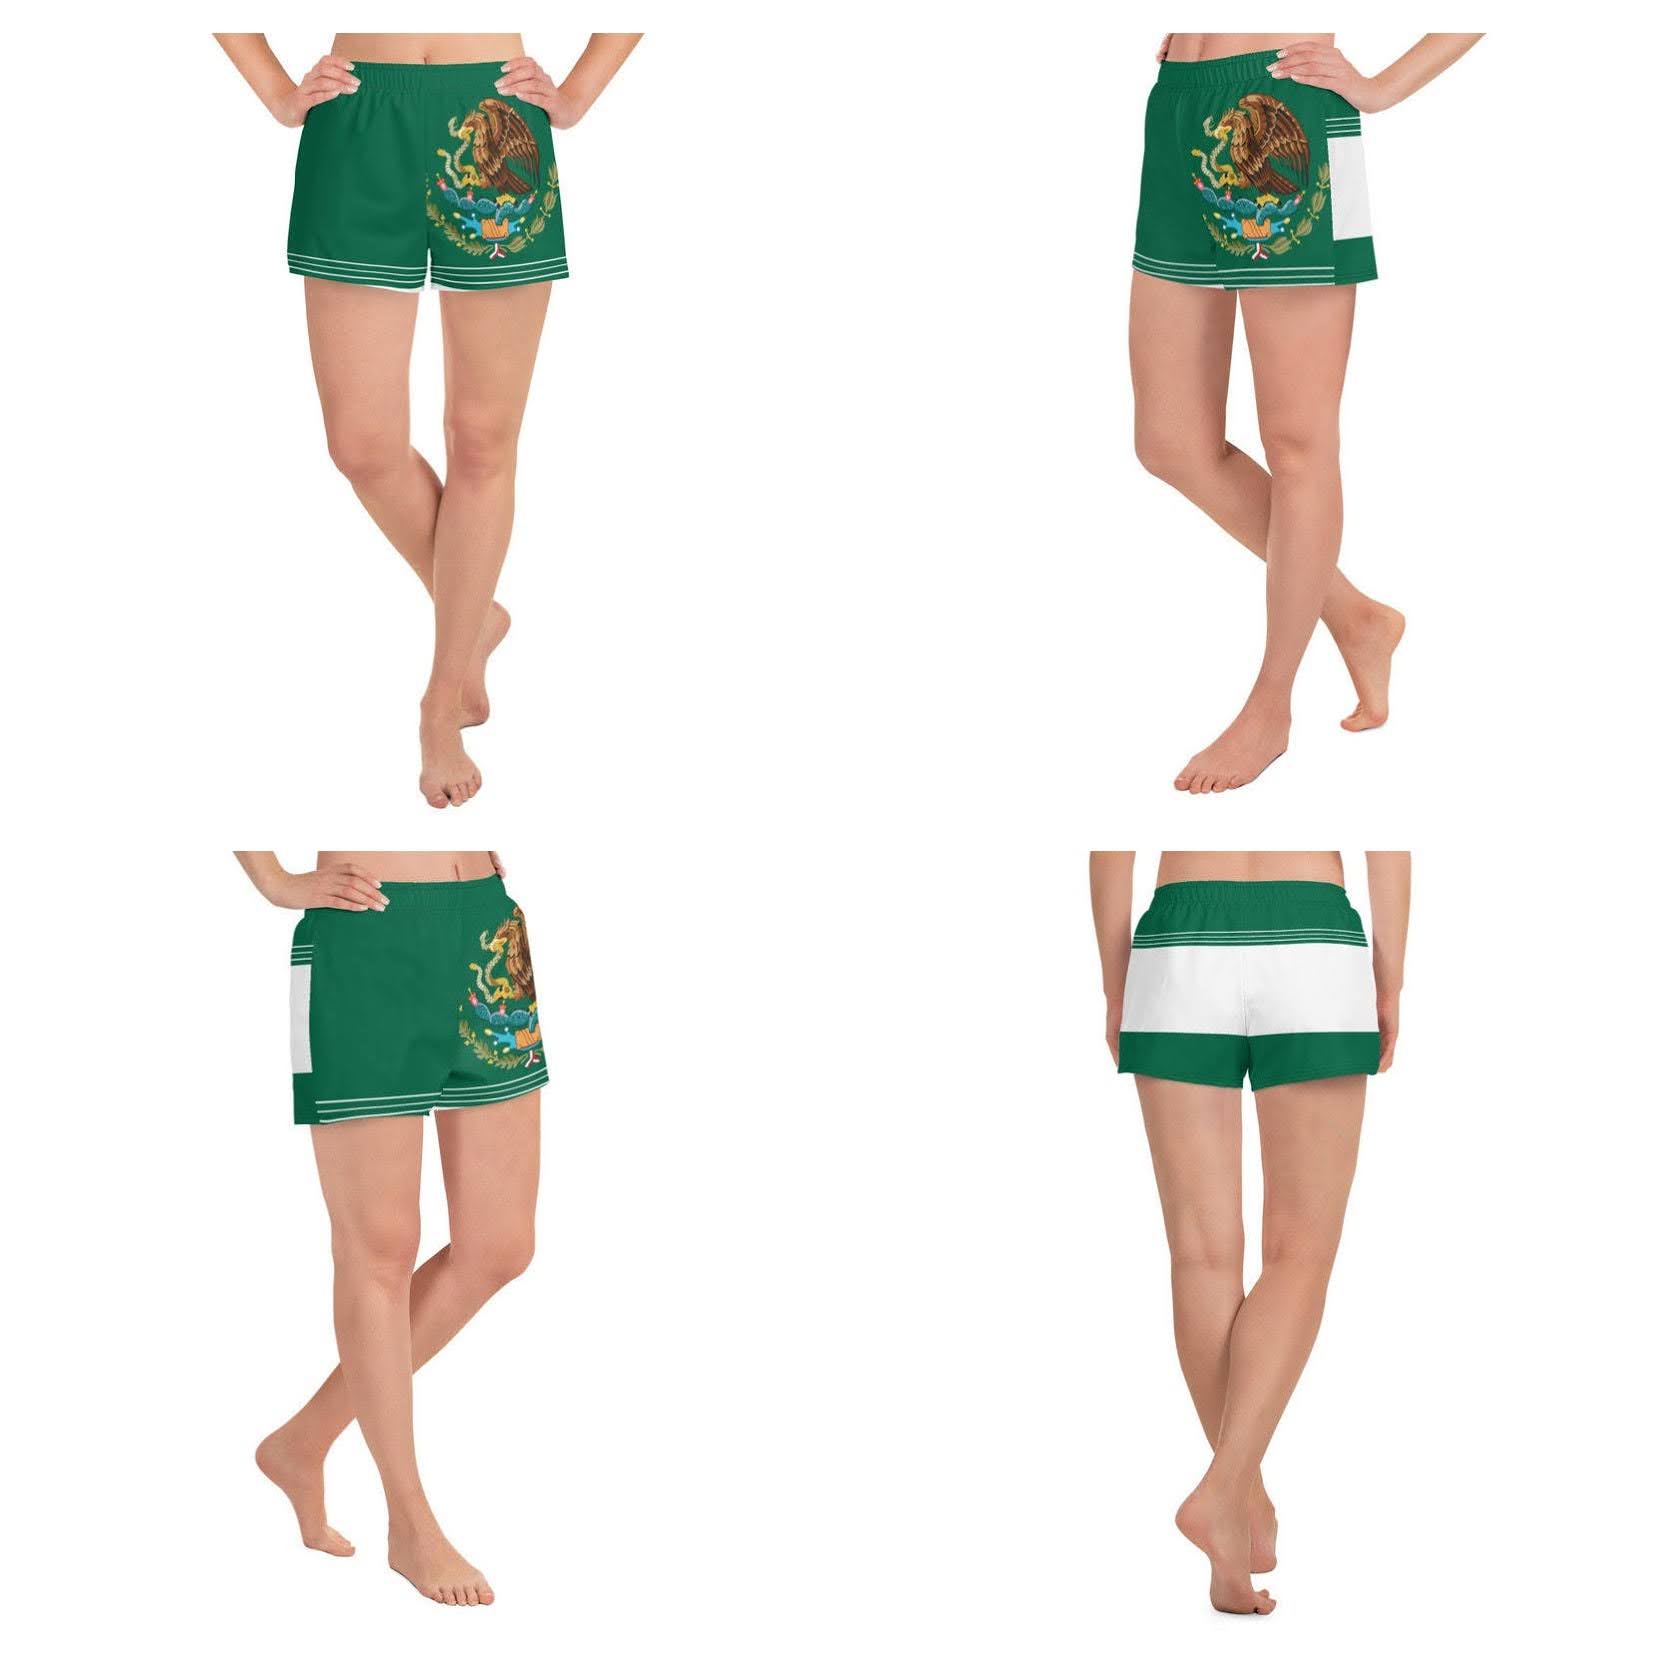 When it comes to the Volleybragswag volleyball coverup shorts, a loose-fitting pair offers various benefits.